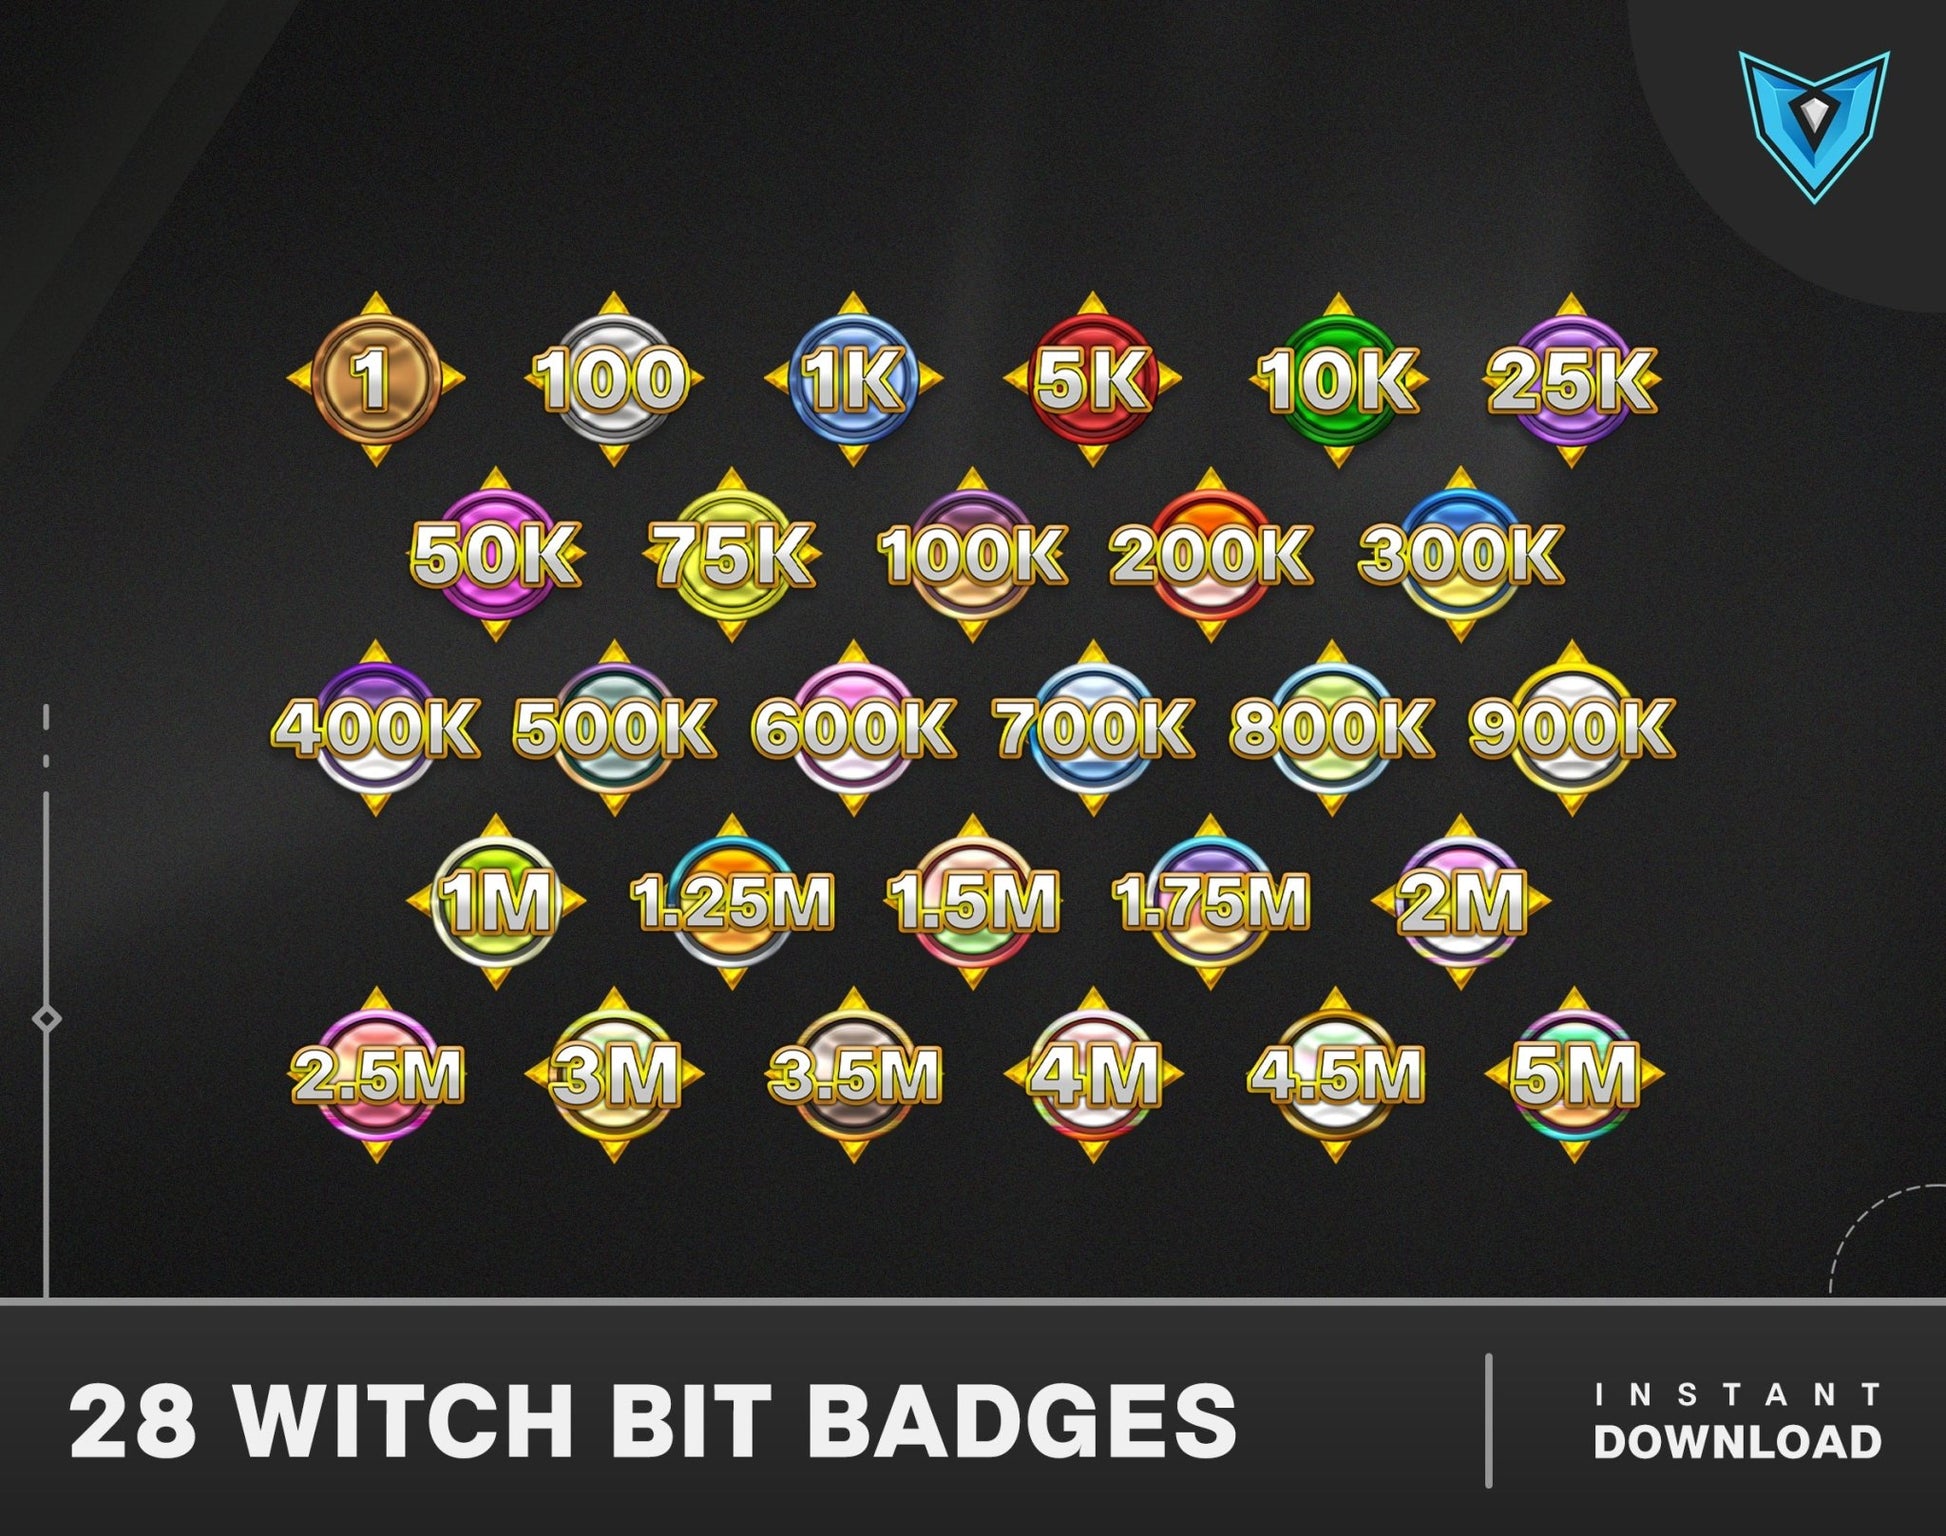 Top 21 Twitch Sub Badges To Spice Up Your Streams